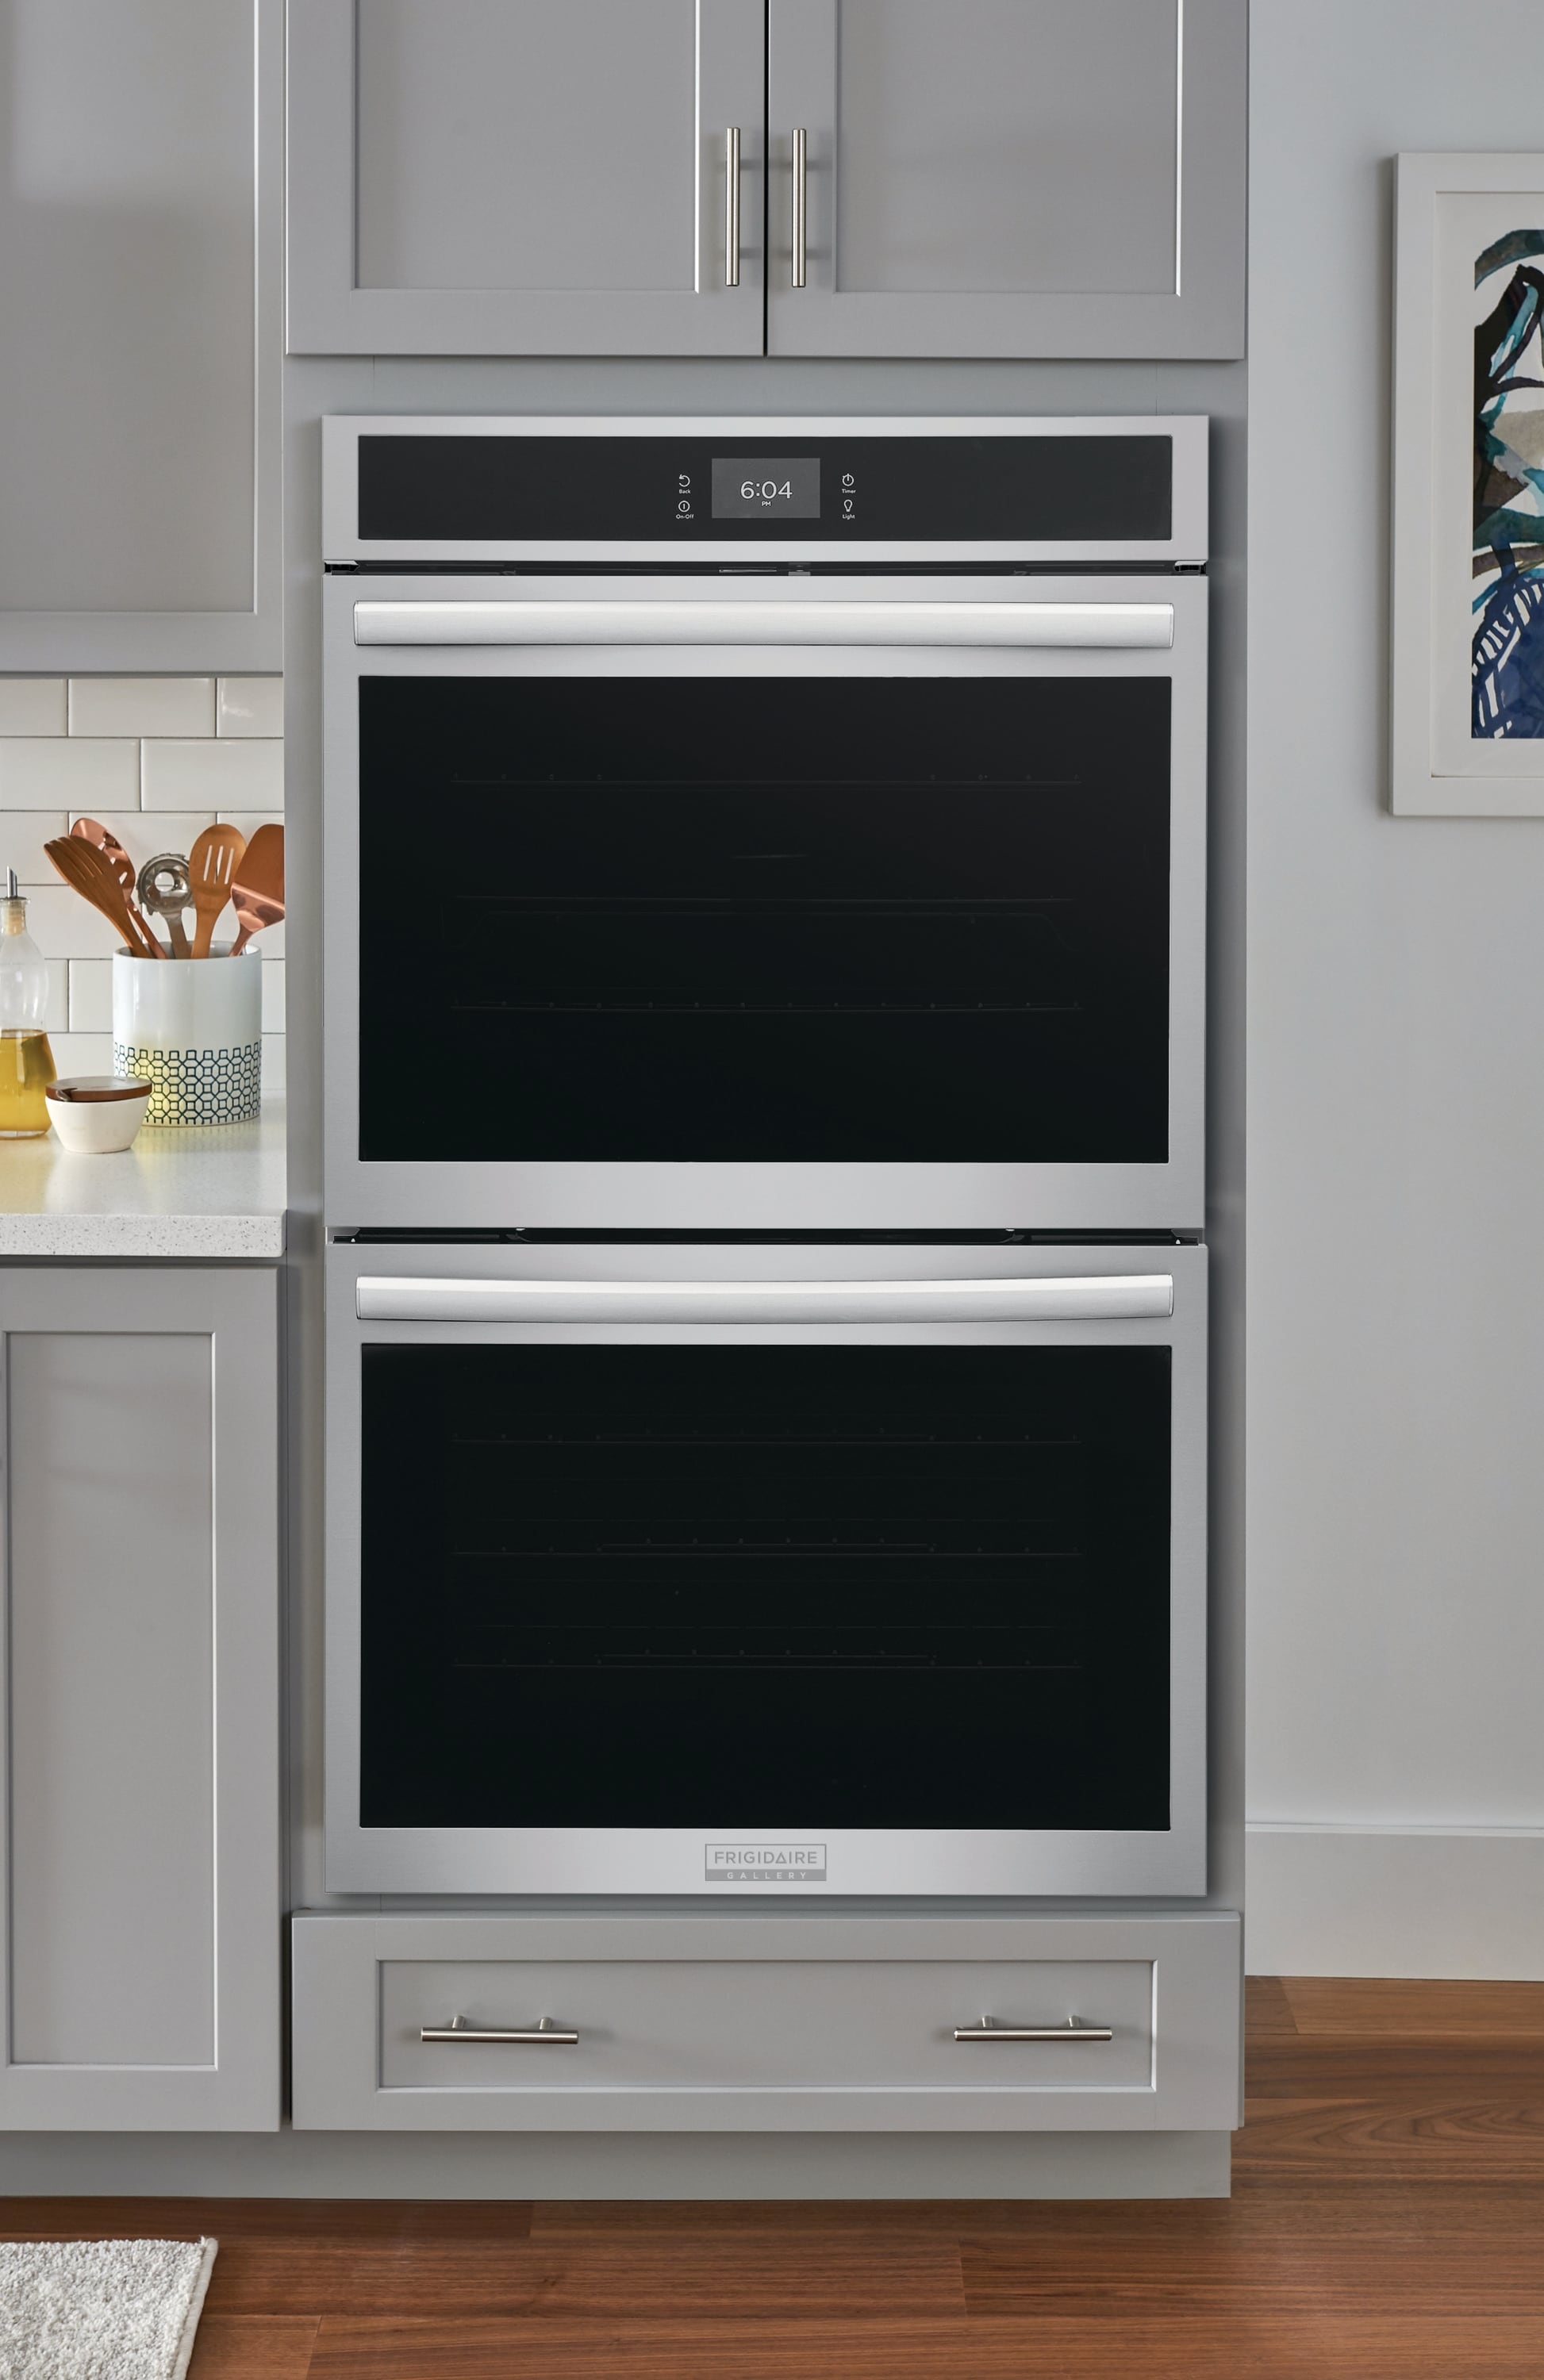 Shop Frigidaire Gallery French Door Refrigerator & Air Fry Electric Range  Suite in Smudge-Proof® Stainless Steel at